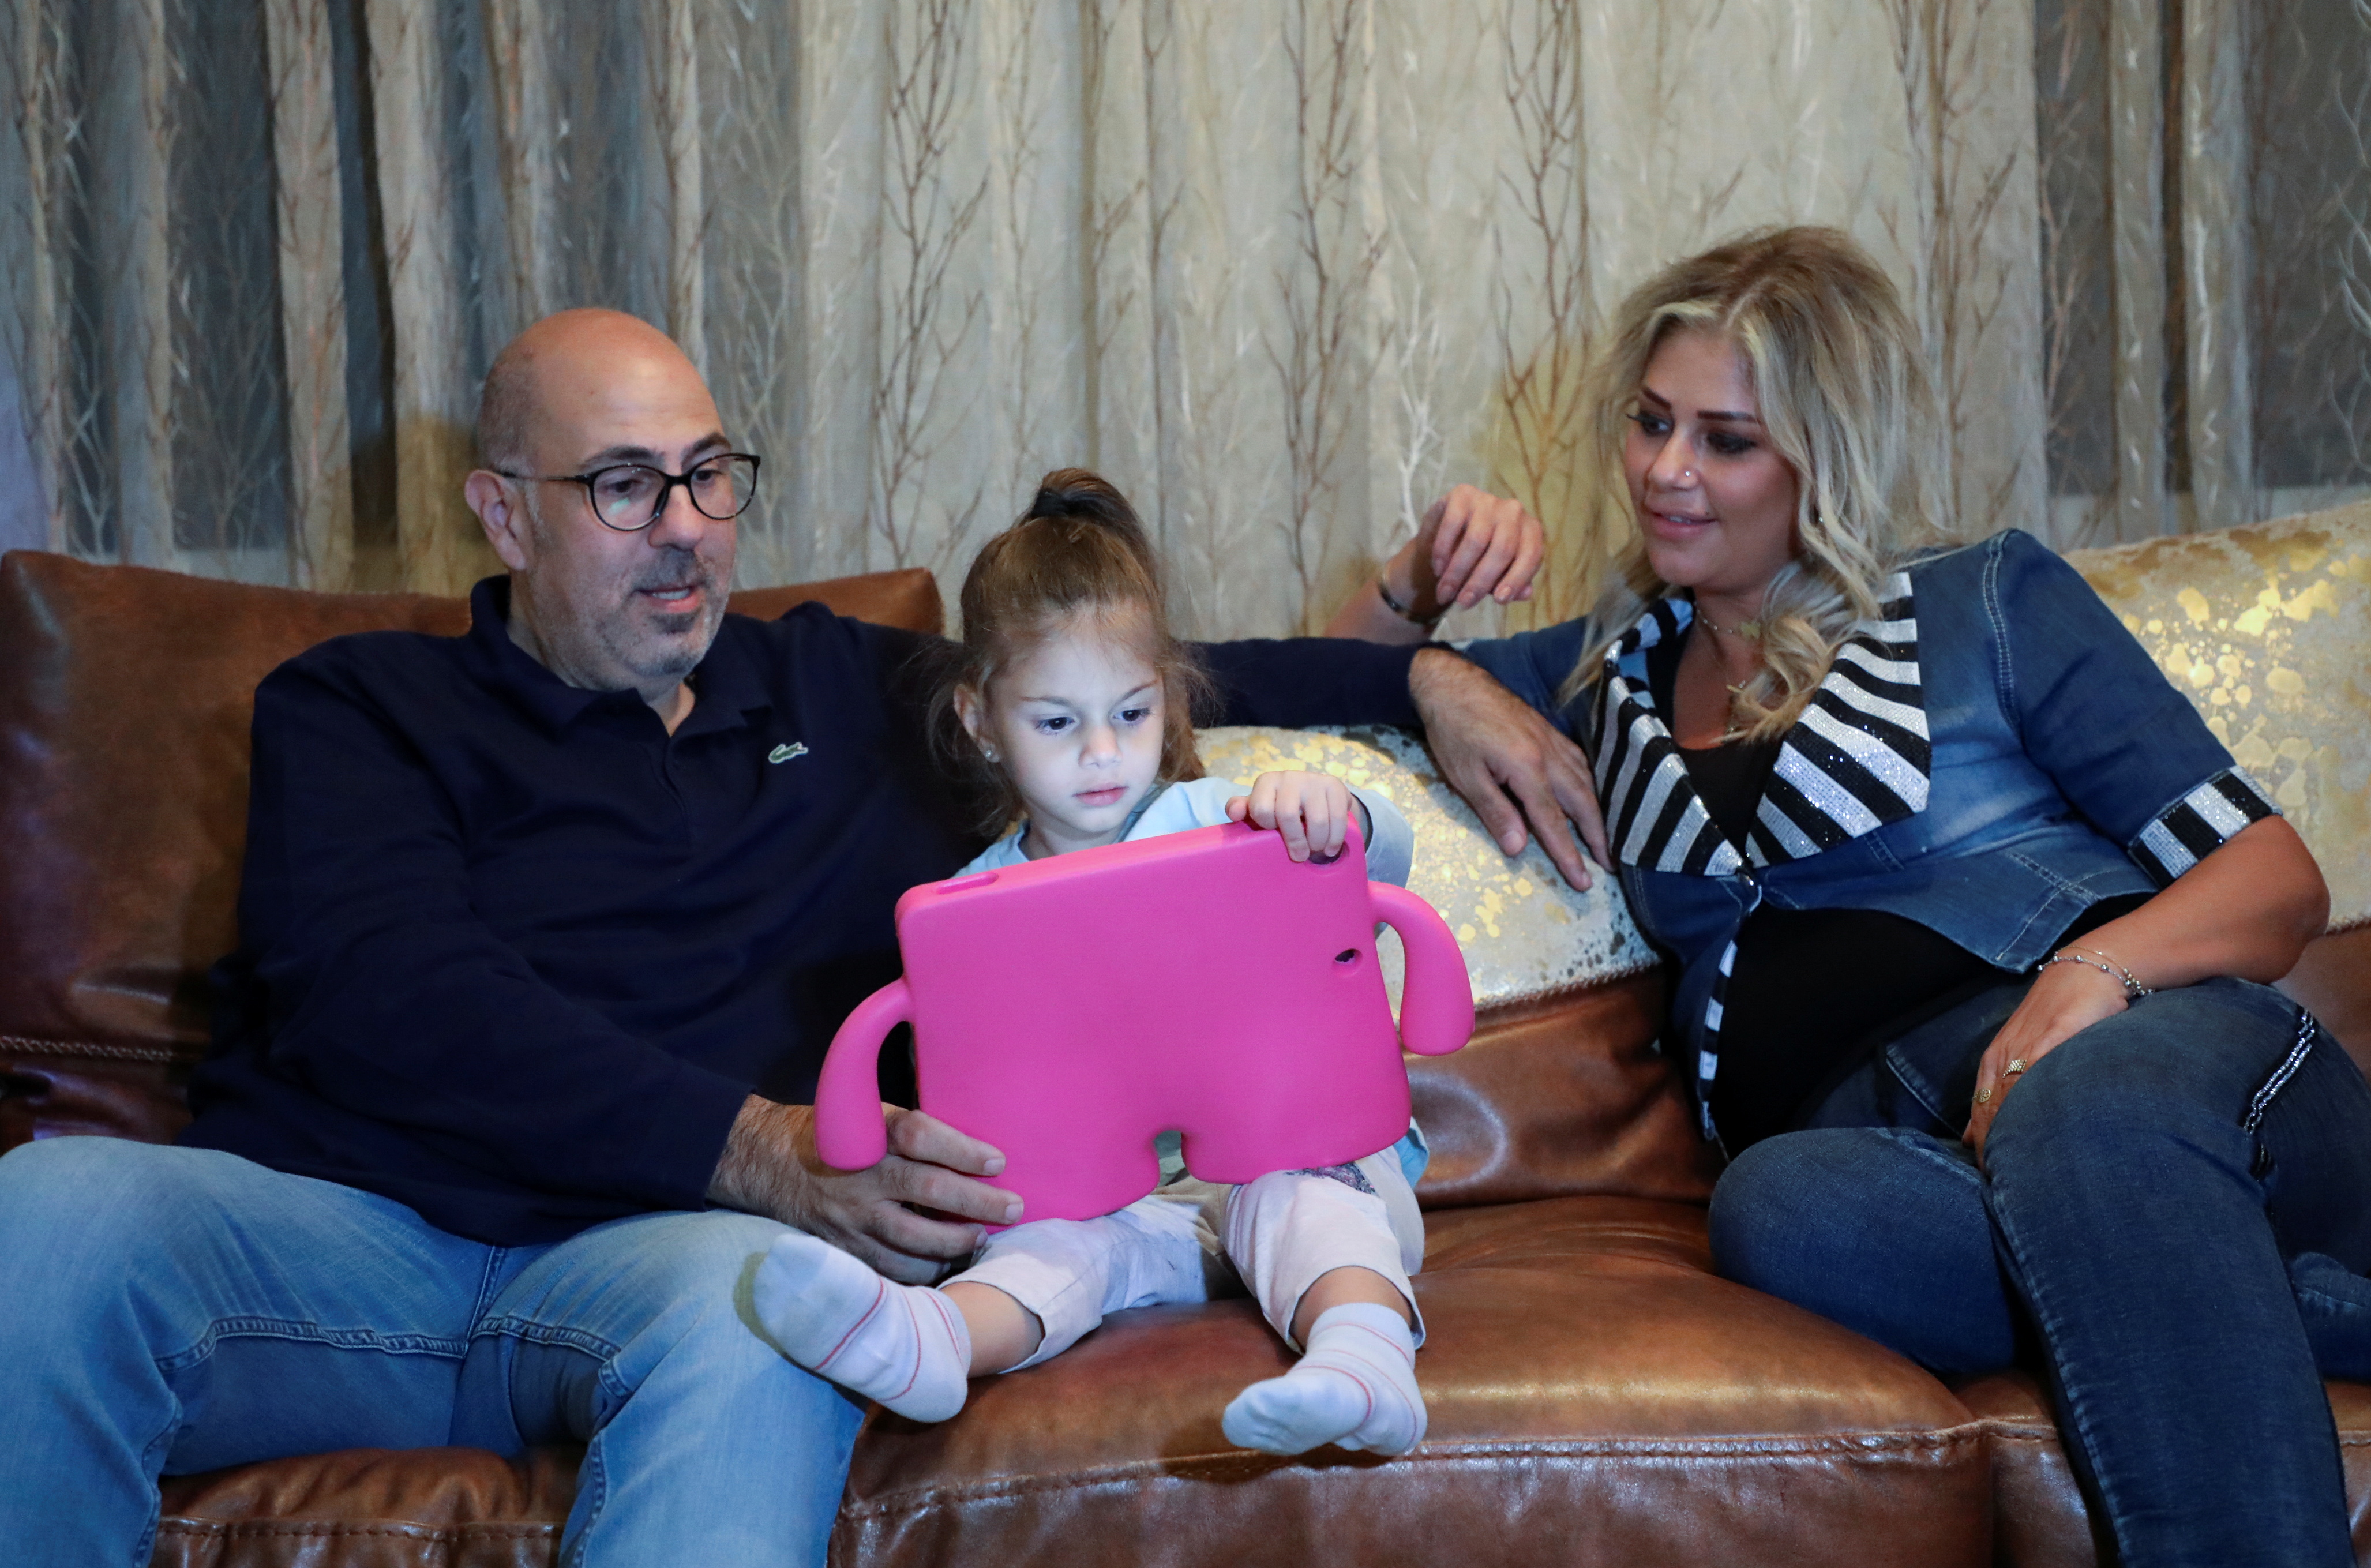 Ralph Khoury, 44, sits with his wife and one of his two daughters, during an interview with Reuters at his home in Qornet El Hamra, Lebanon, September 24, 2021. REUTERS/Mohamed Azakir